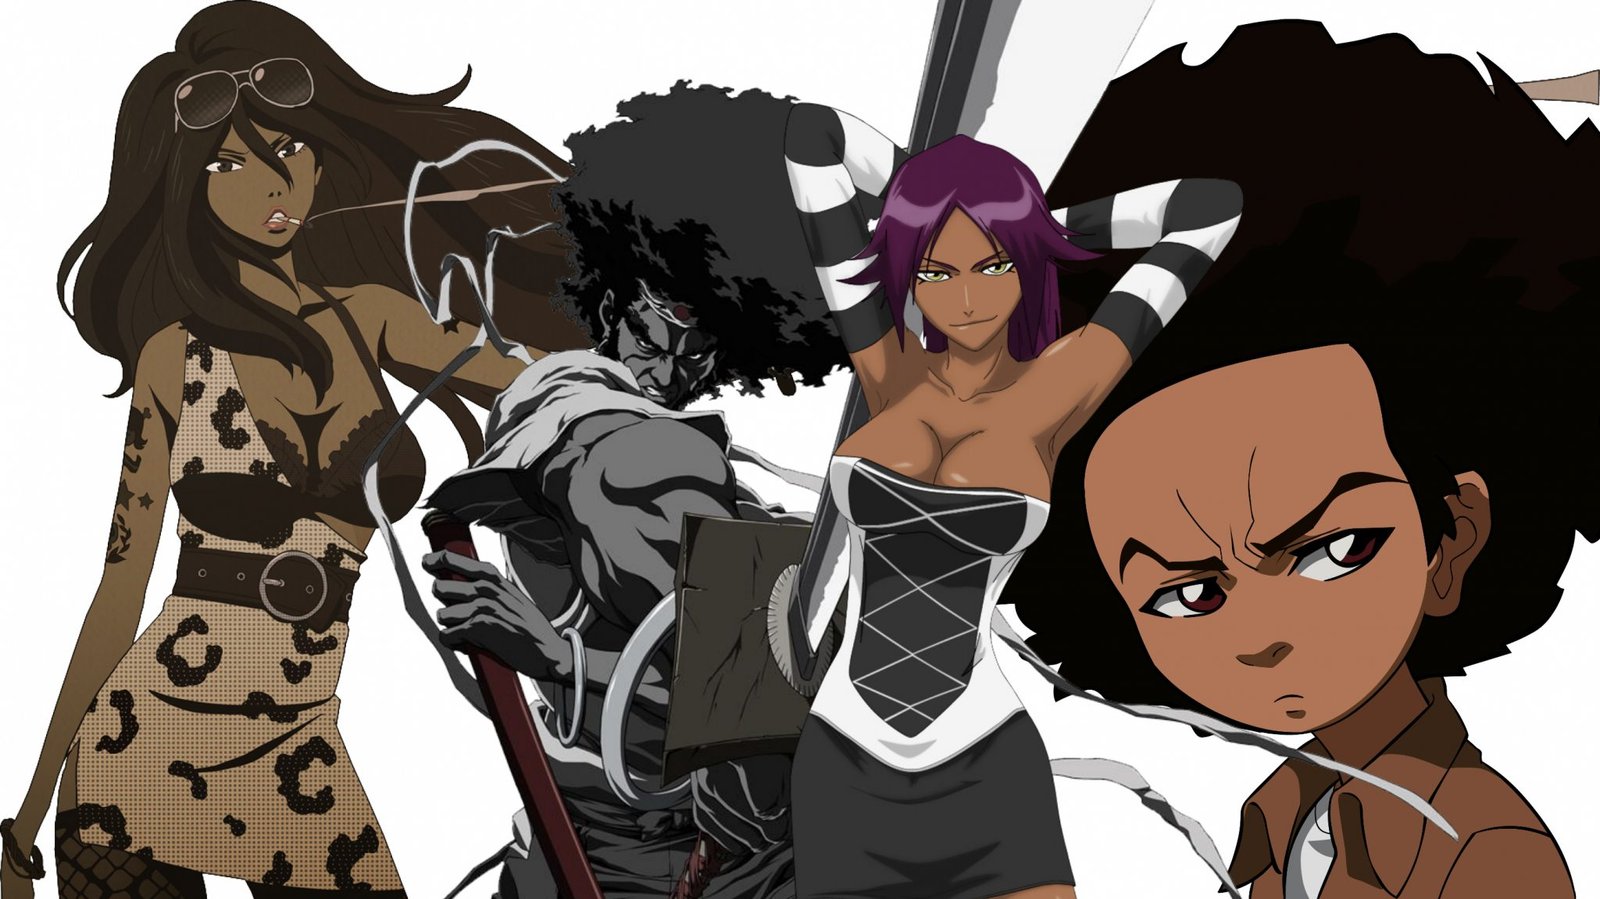 Top 25 Most Loved Black Anime Characters.